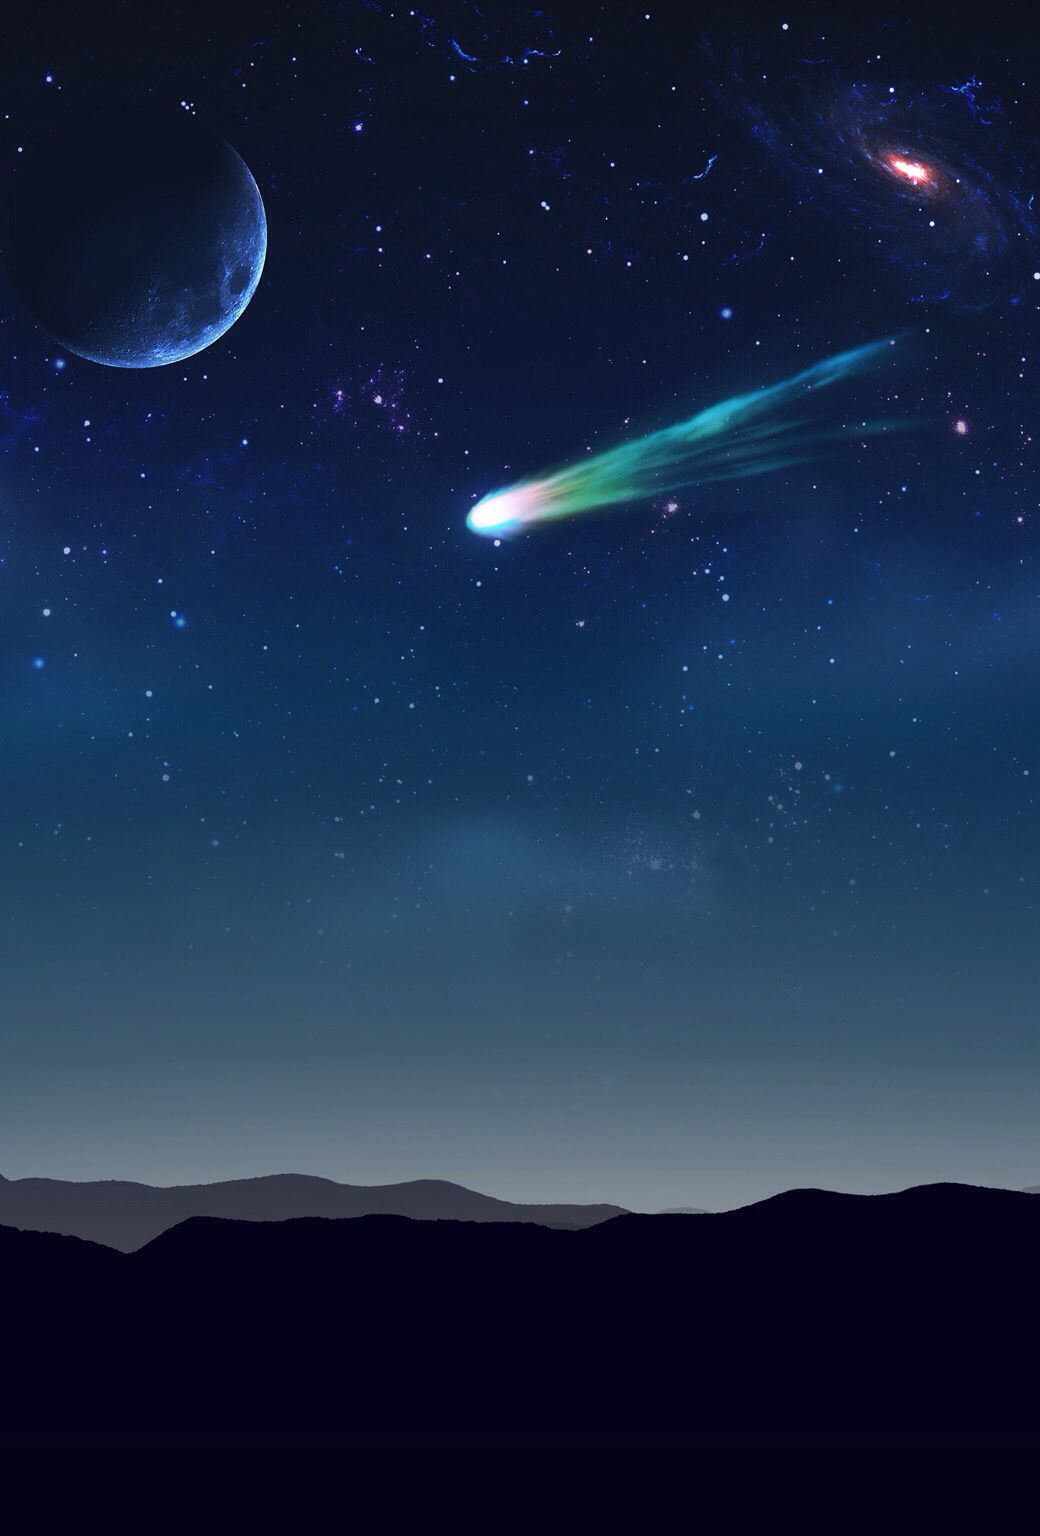 Shooting star. Cool background, Space photography, Wallpaper space